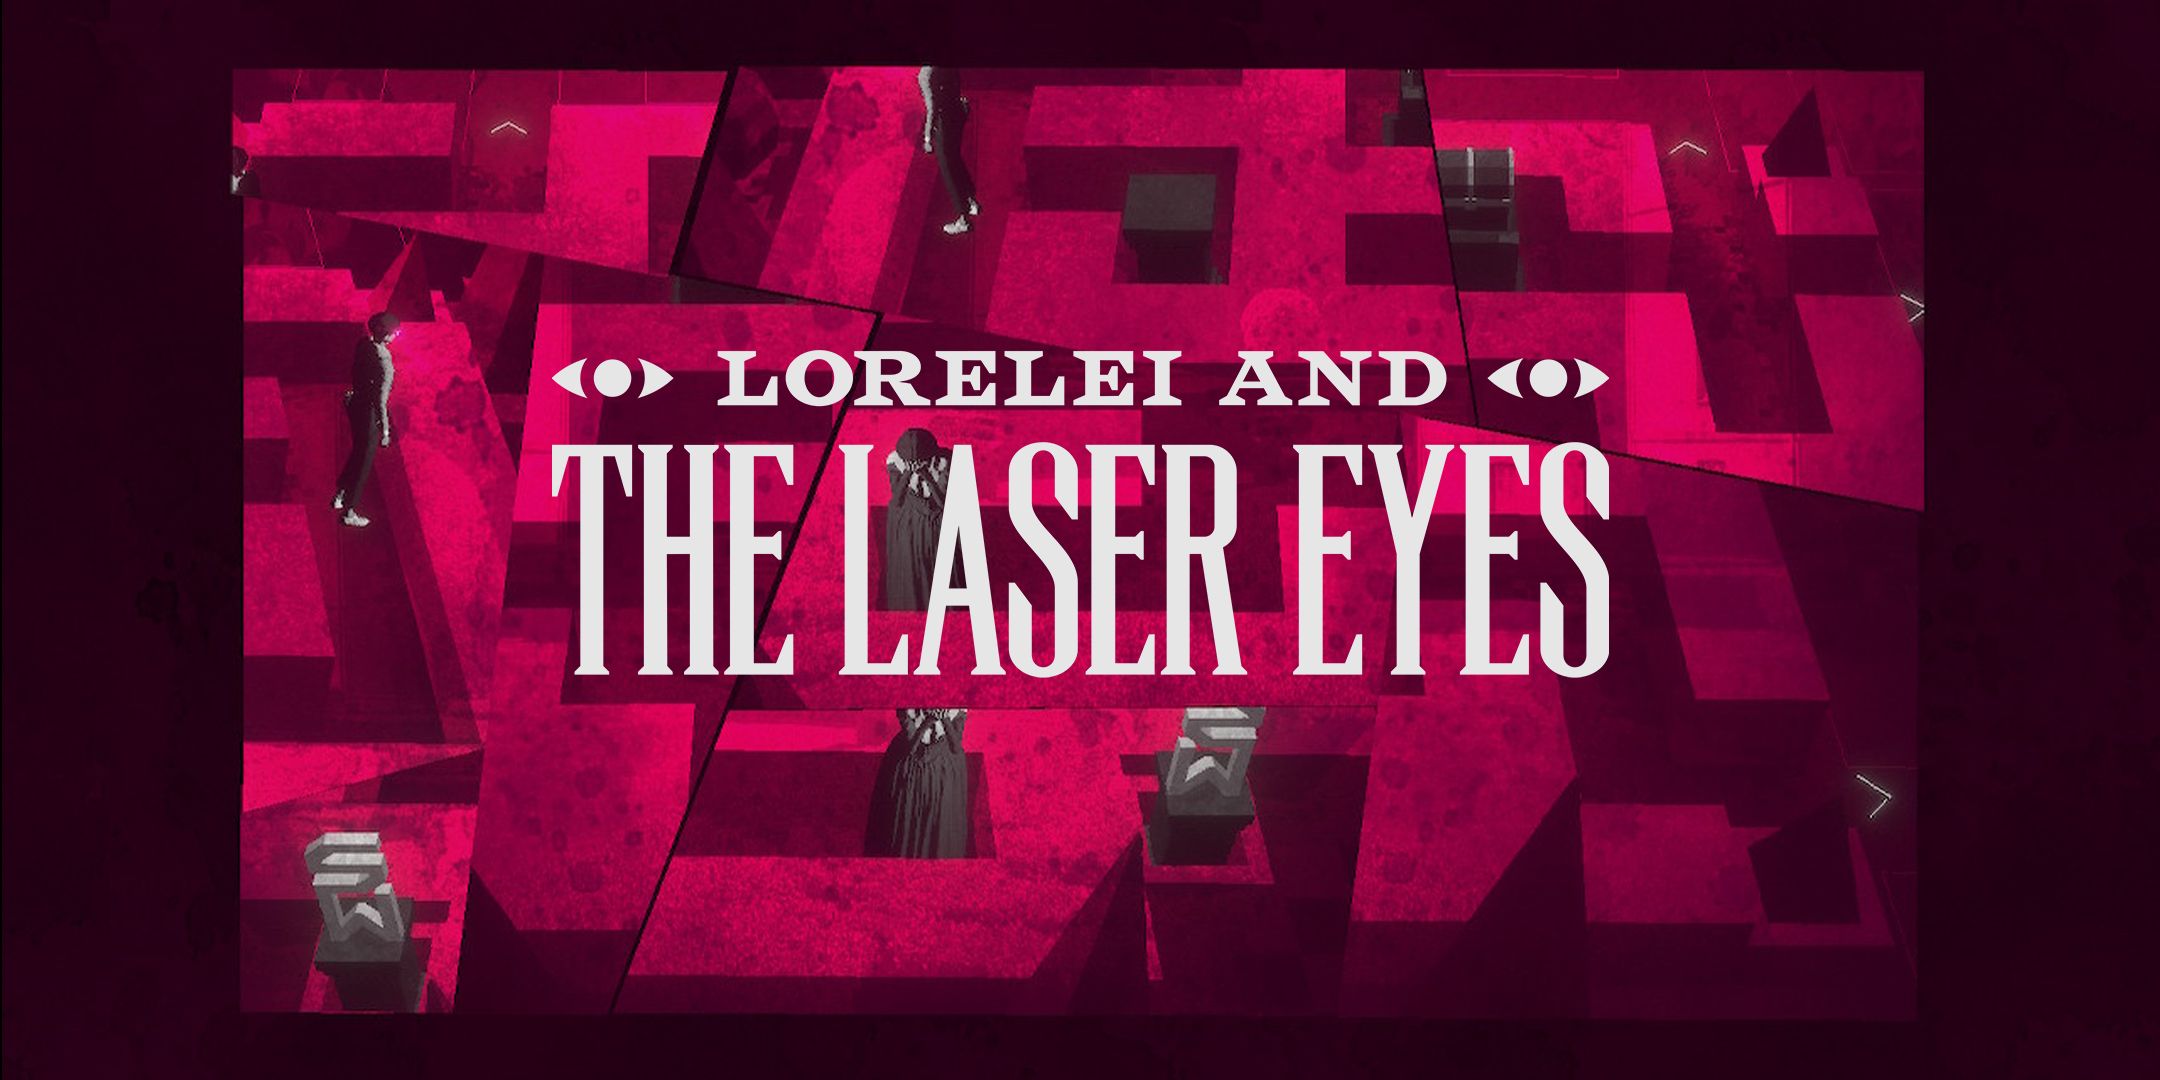 Lorelei and the Laser Eyes logo over an image of a fractured maze.